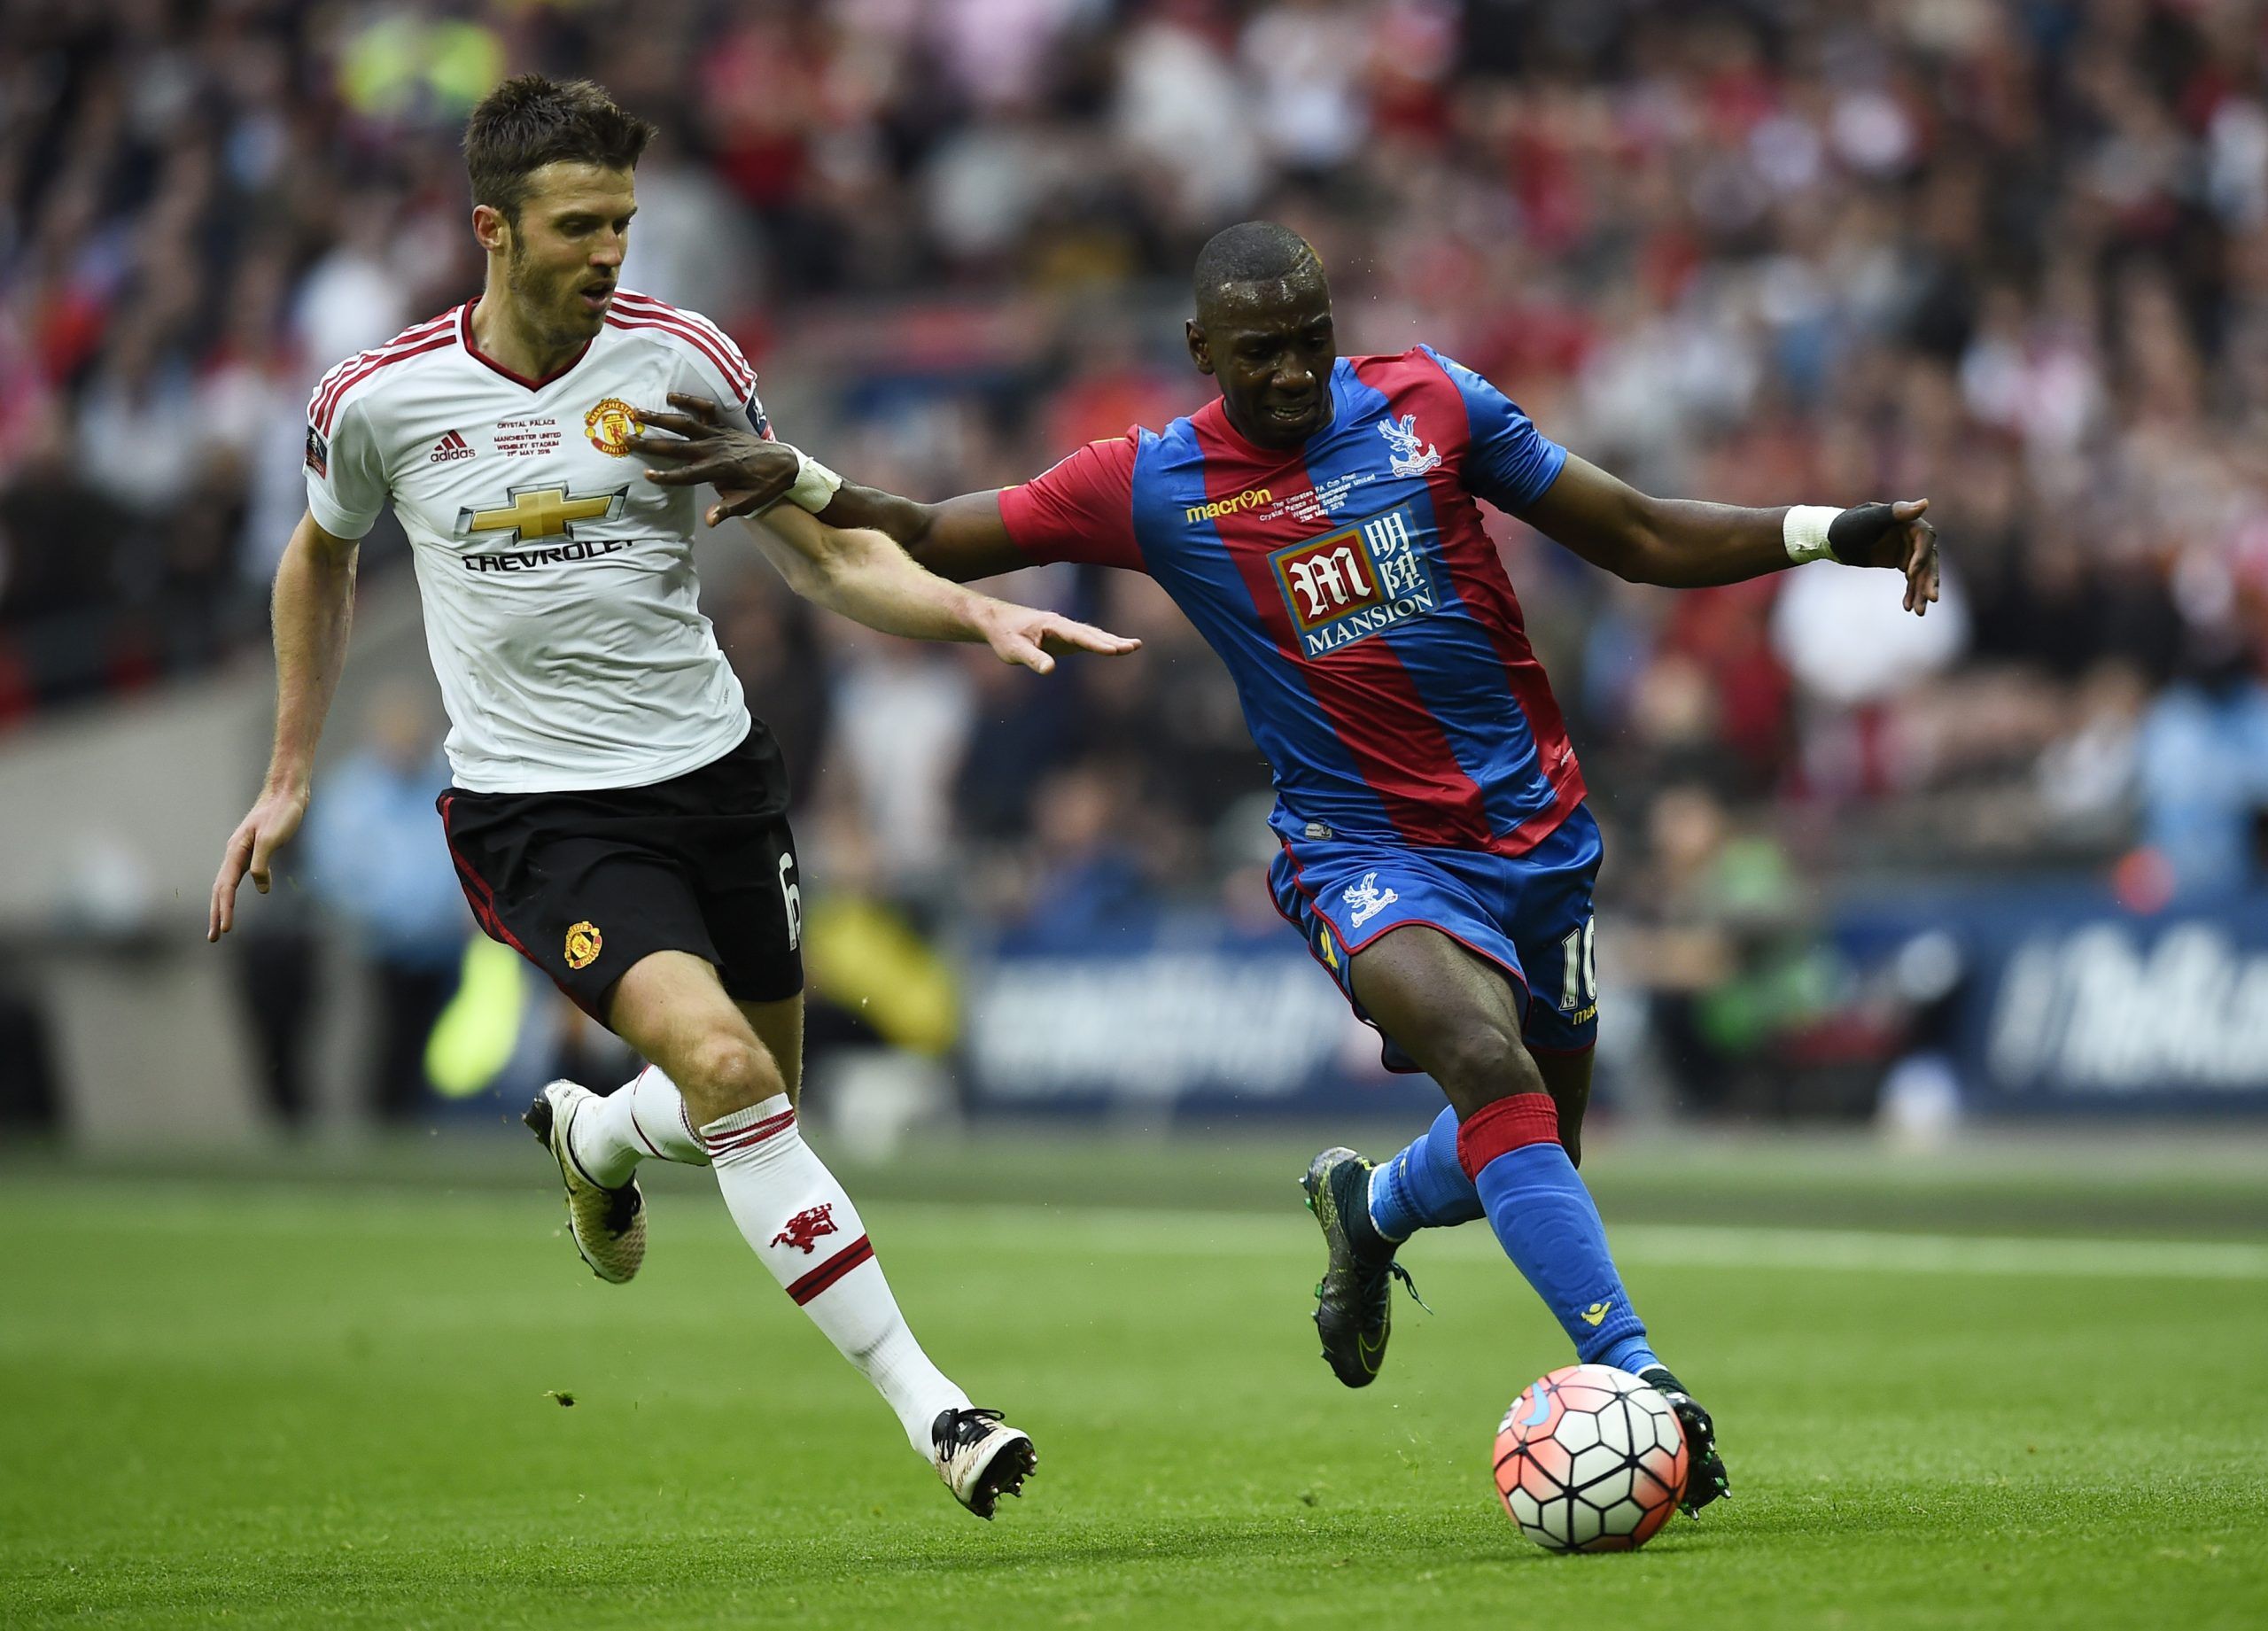 Where are they now- Crystal Palace - Yannick Bolasie